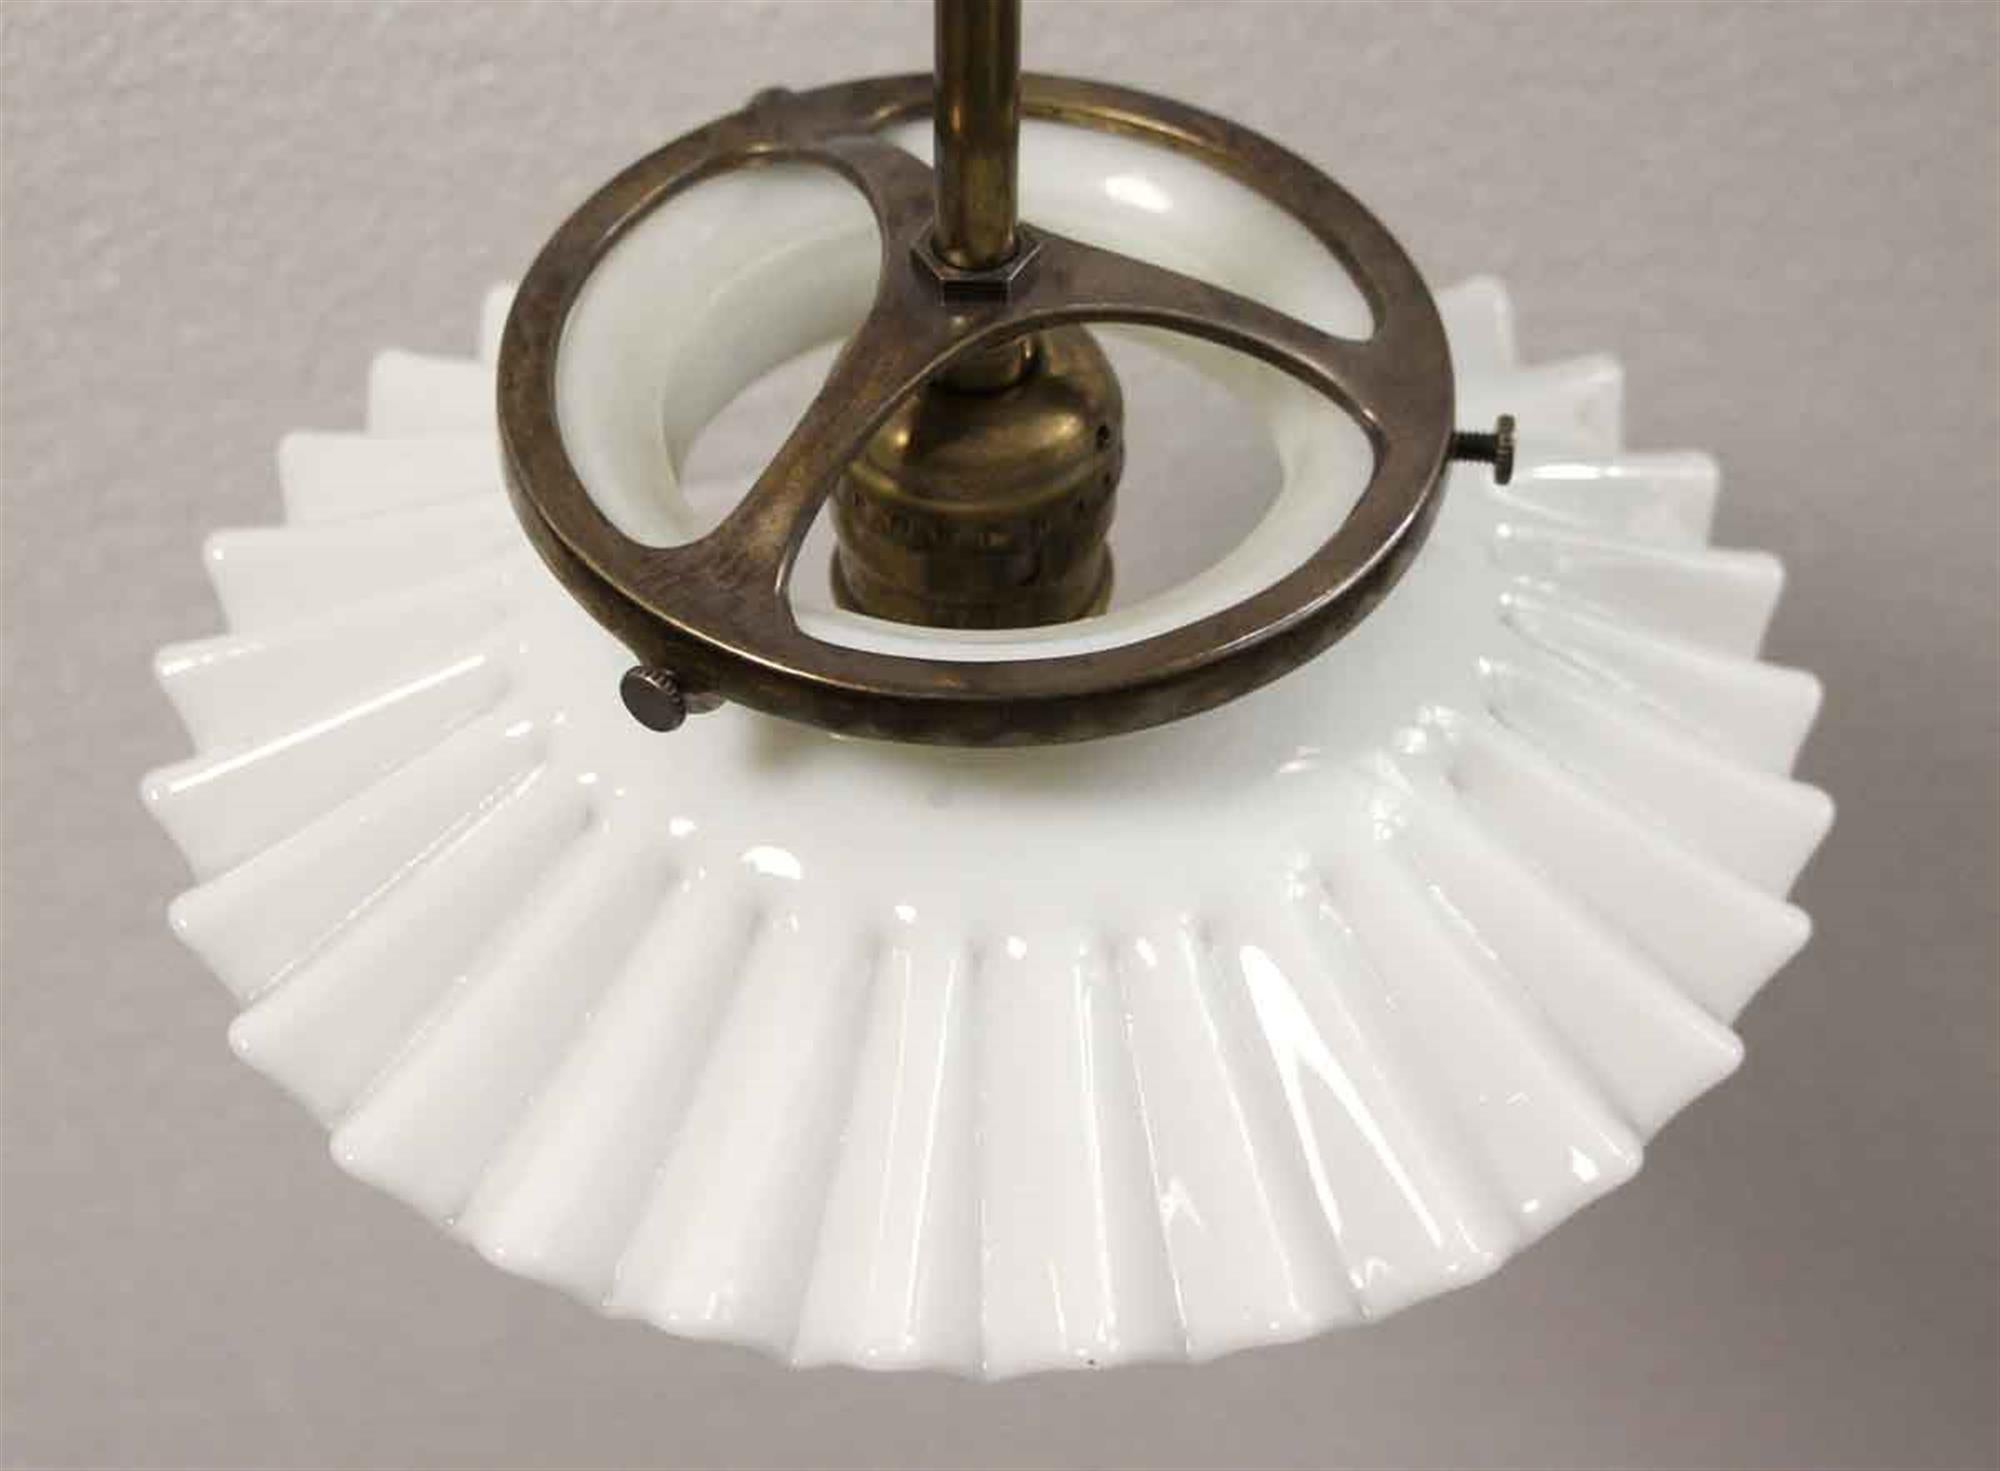 Single bulb ruffled white milk glass pendant fixture from the 1930s. The shade is vintage paired with a replica pole in an antique brass finish. Small quantity available at time of posting. Priced each. This can be seen at our 400 Gilligan St